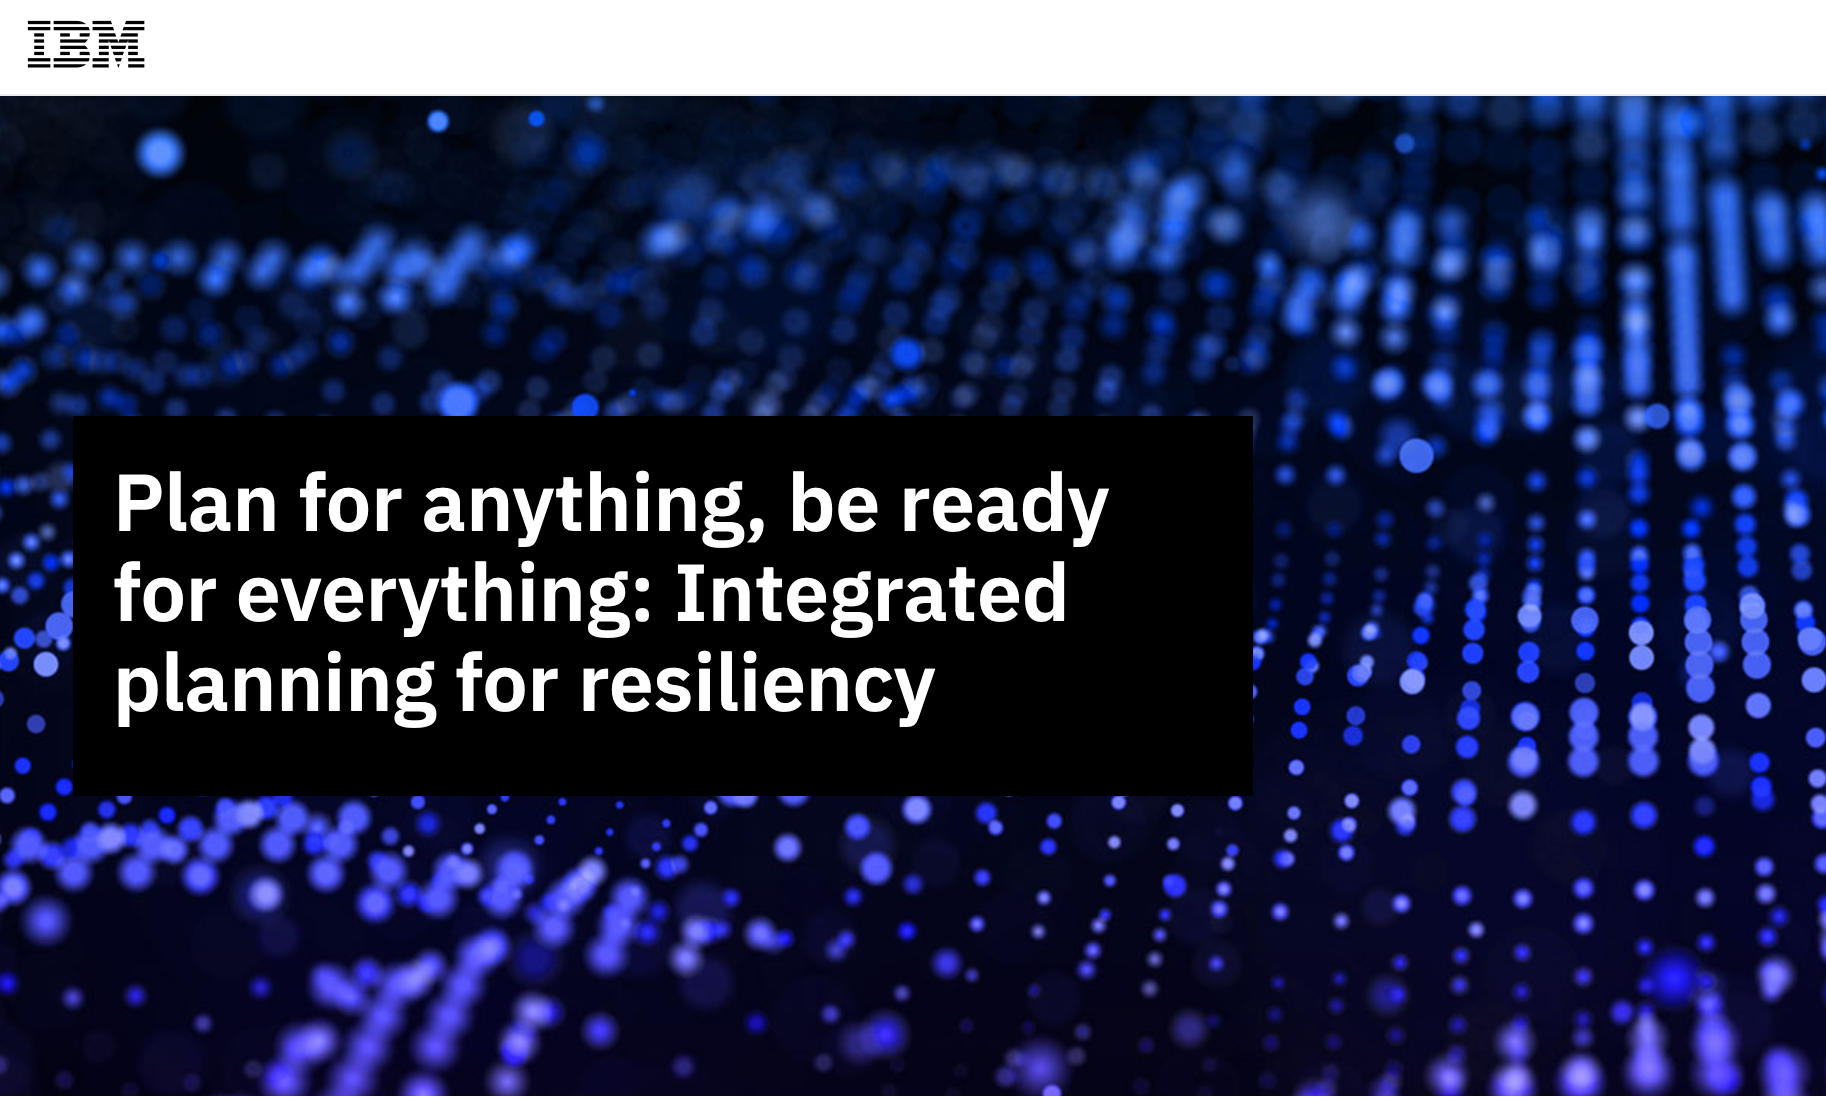 Plan for anything be ready for everything Integrated planning for resiliency - Plan for anything, be ready for everything: Integrated planning for resiliency